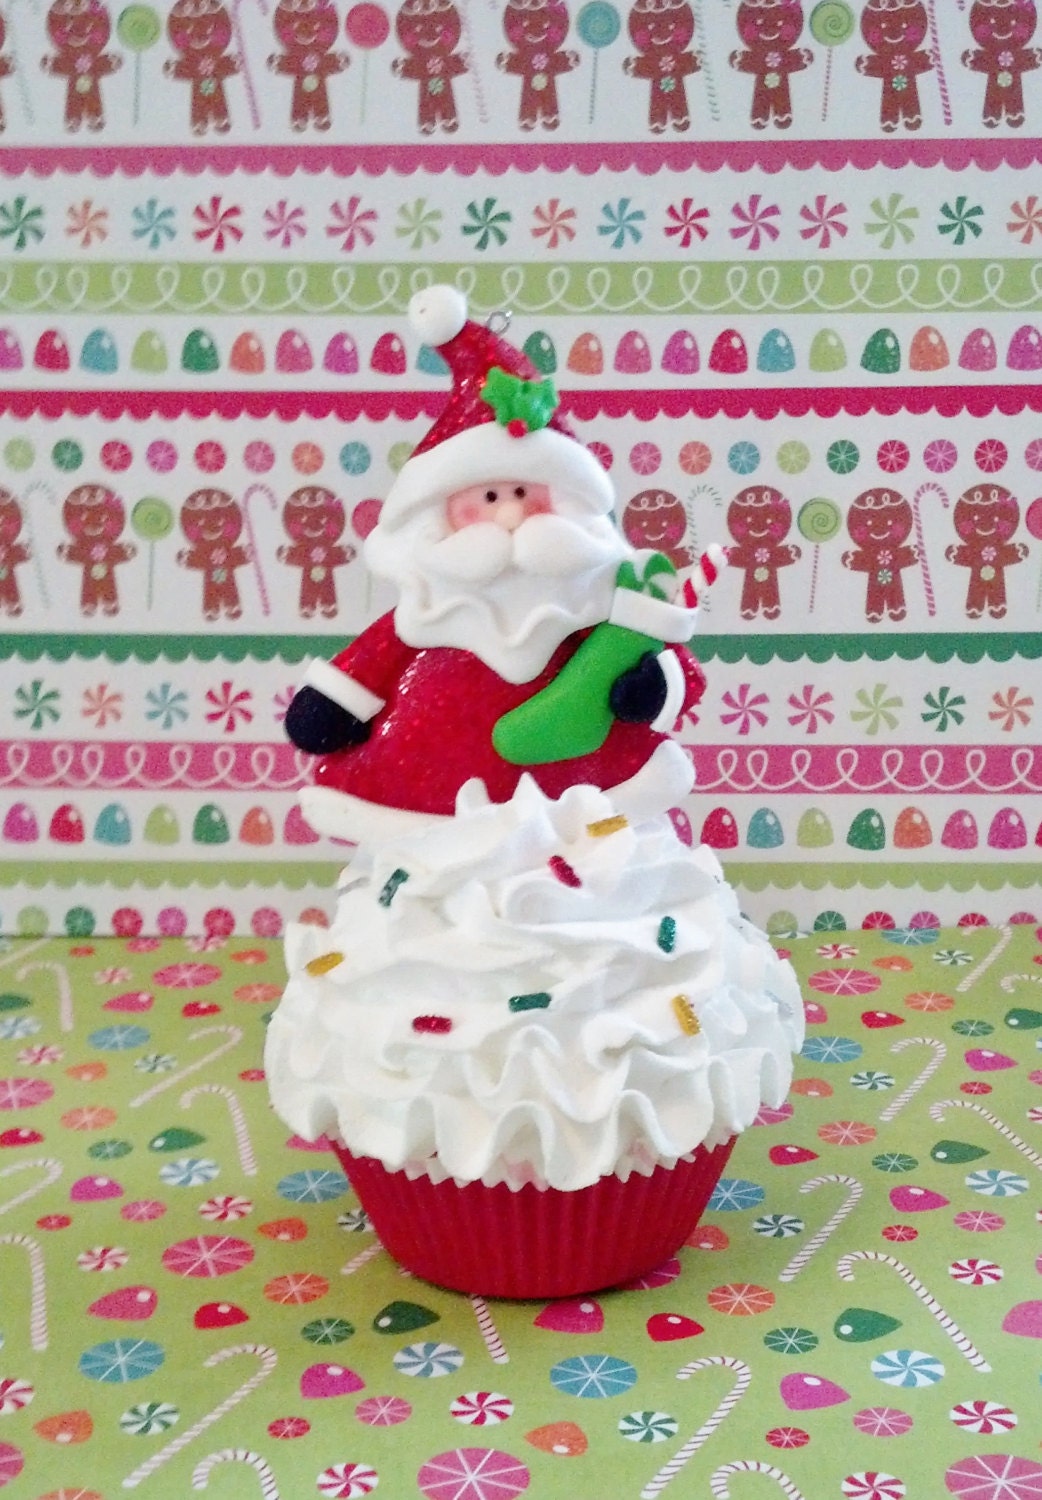 Santa Fake Cupcake Christmas Photo Prop with Handmade Sprinkles for Home Accents Holiday Decor Tree Ornaments Party Decorations Shop Display